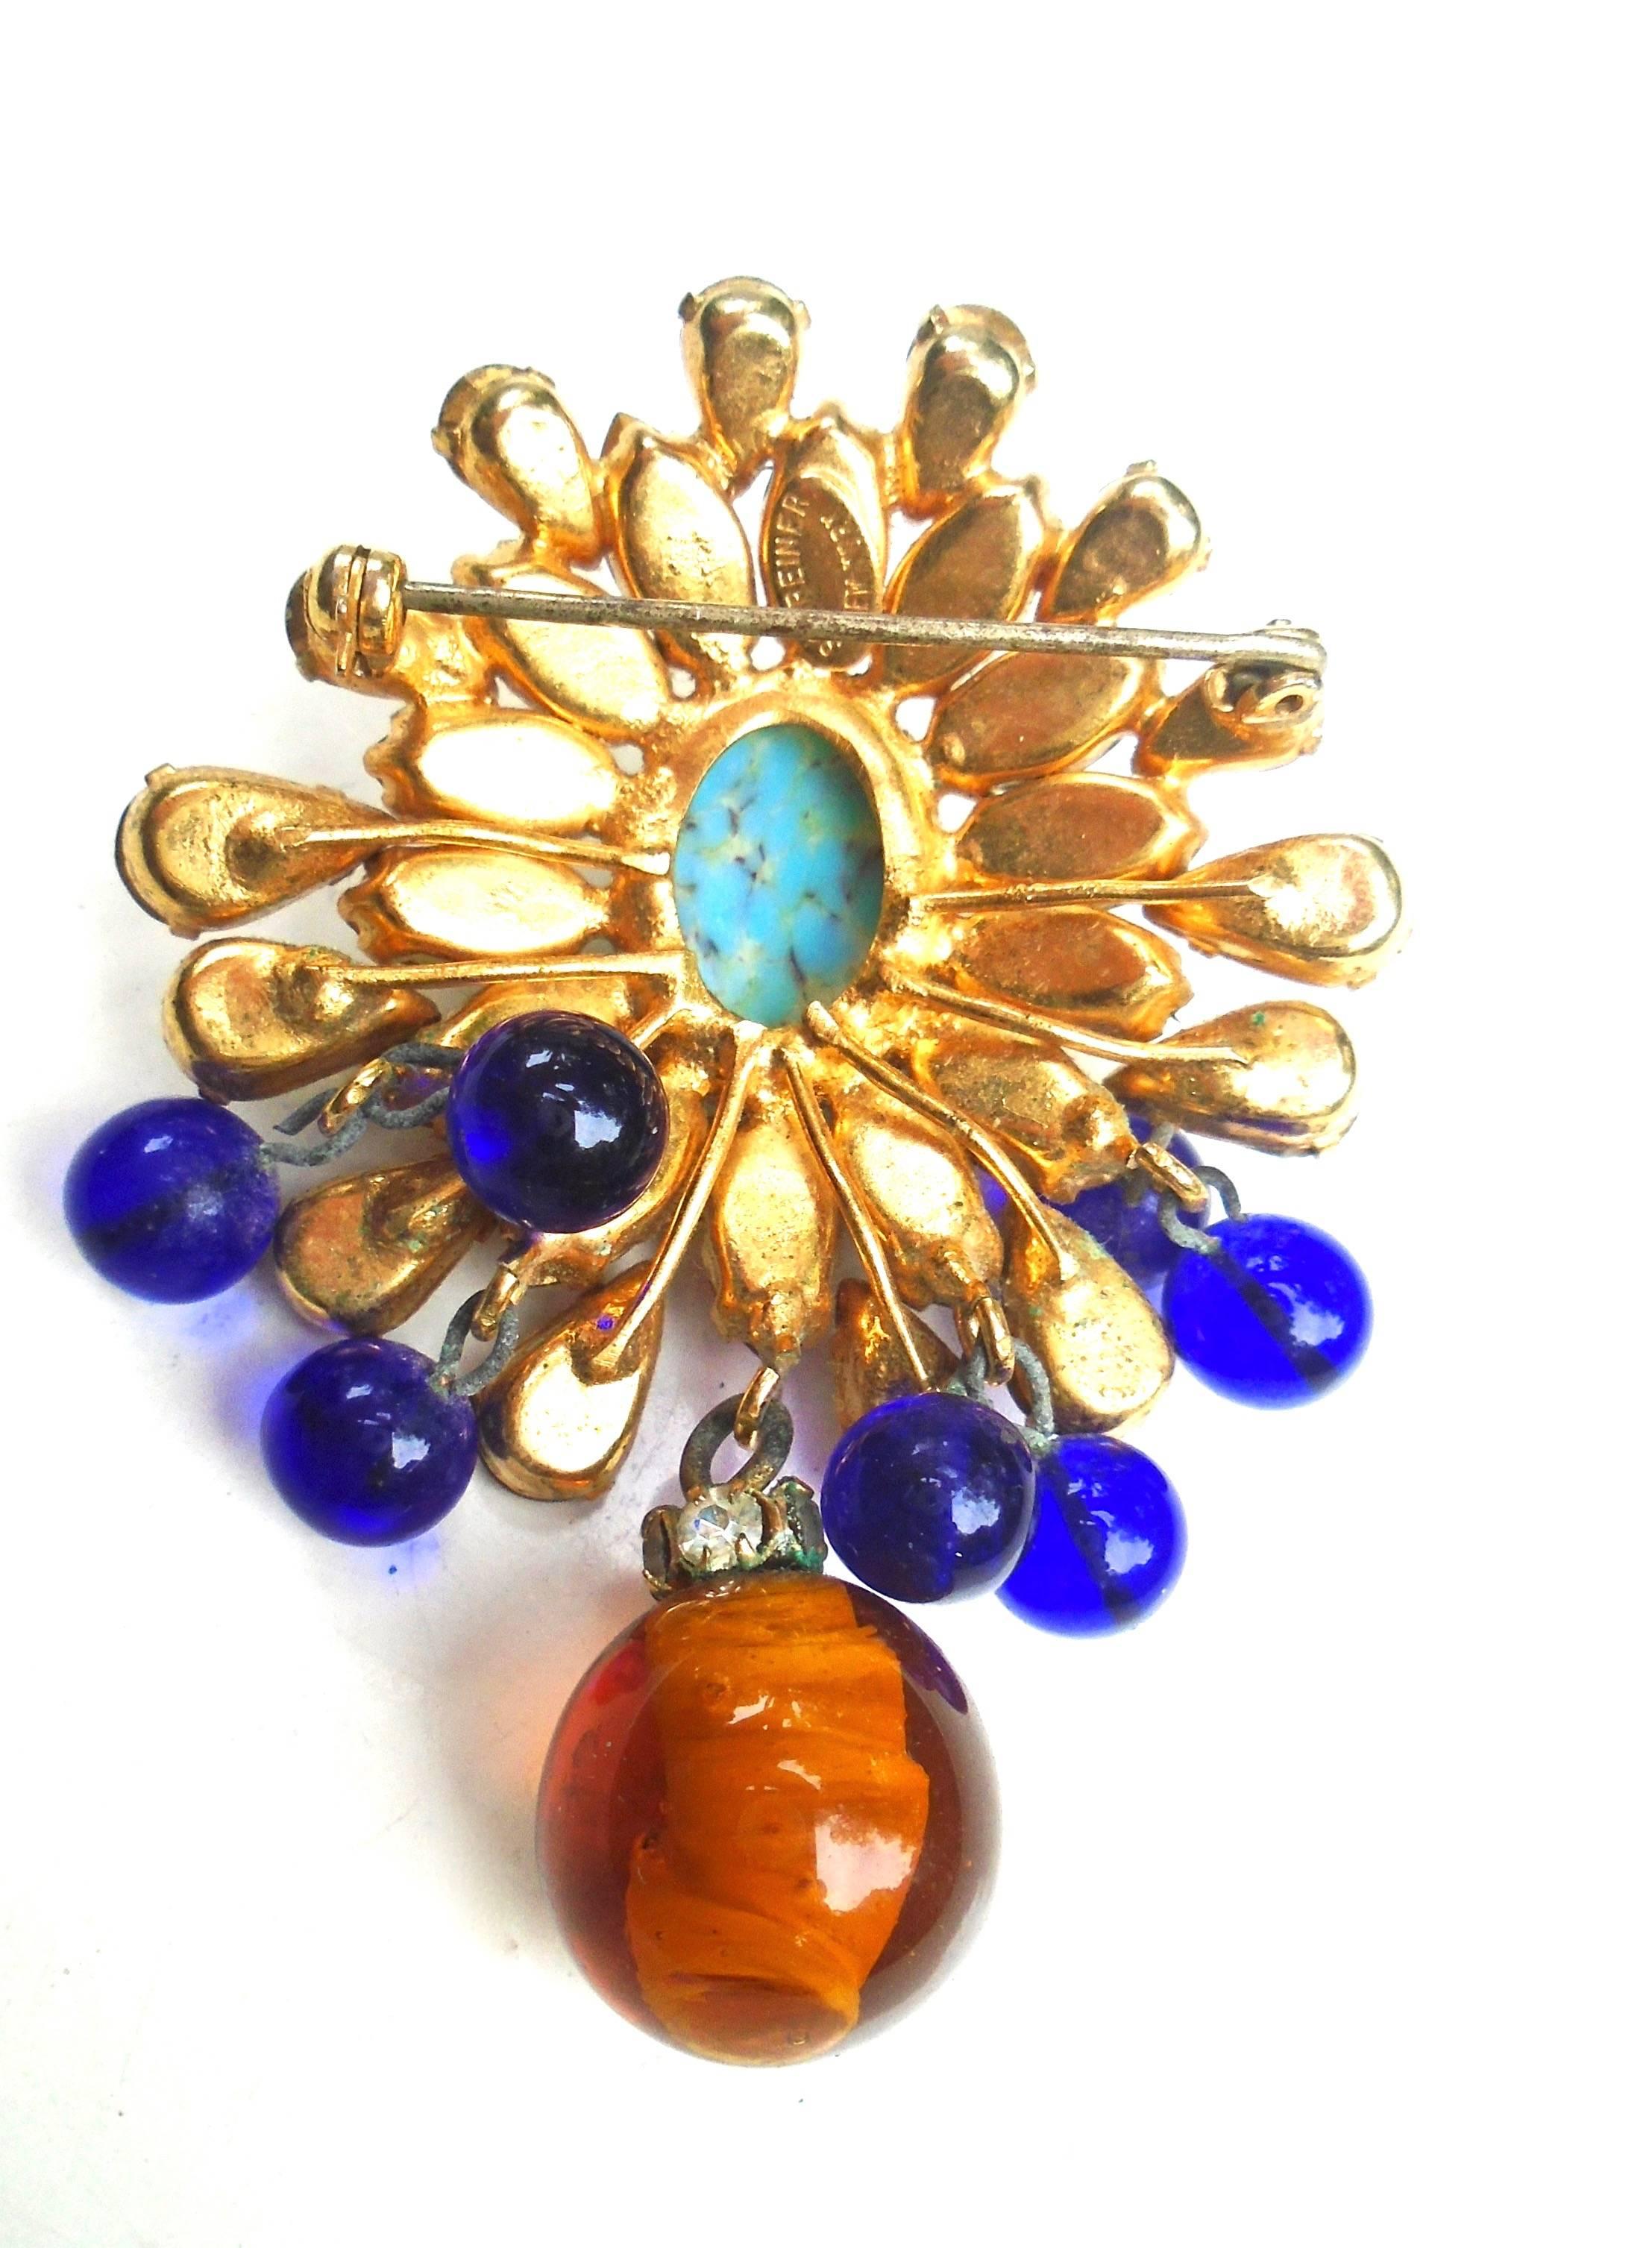 Lovely Schreiner brooch with a great mix of colors and glass beads.  The beads are in the style of Gripoix.  Wear and age to the metal connecting the droplets, but they appear thicker and sturdy. A bit of fogginess to a few stones. So the piece does